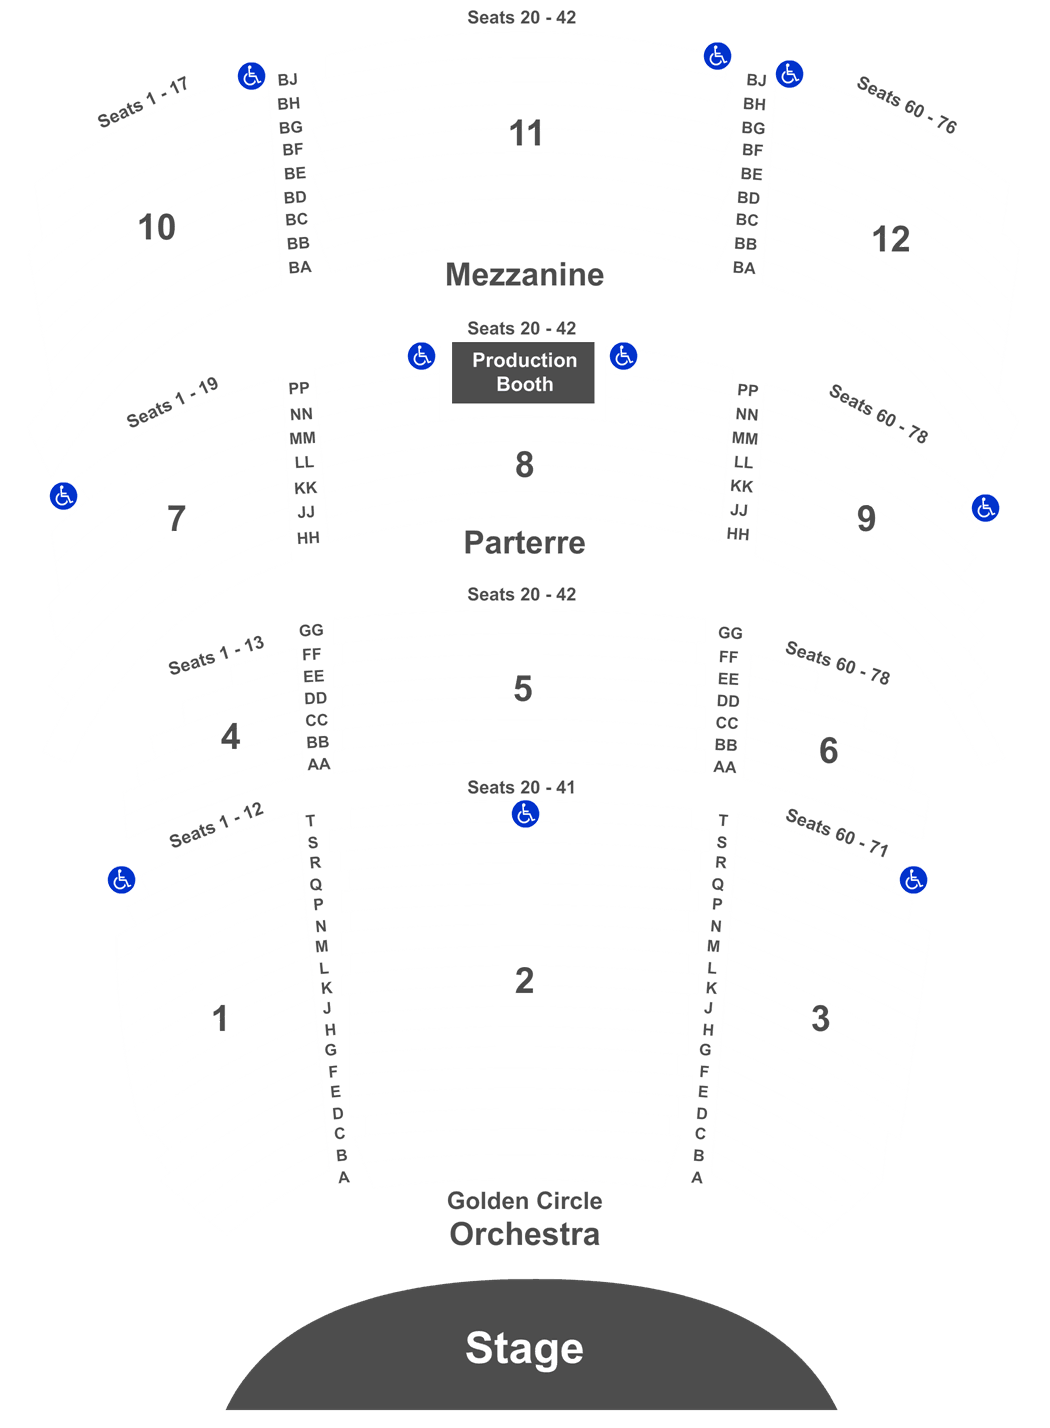 The Venetian Theater Seating Chart